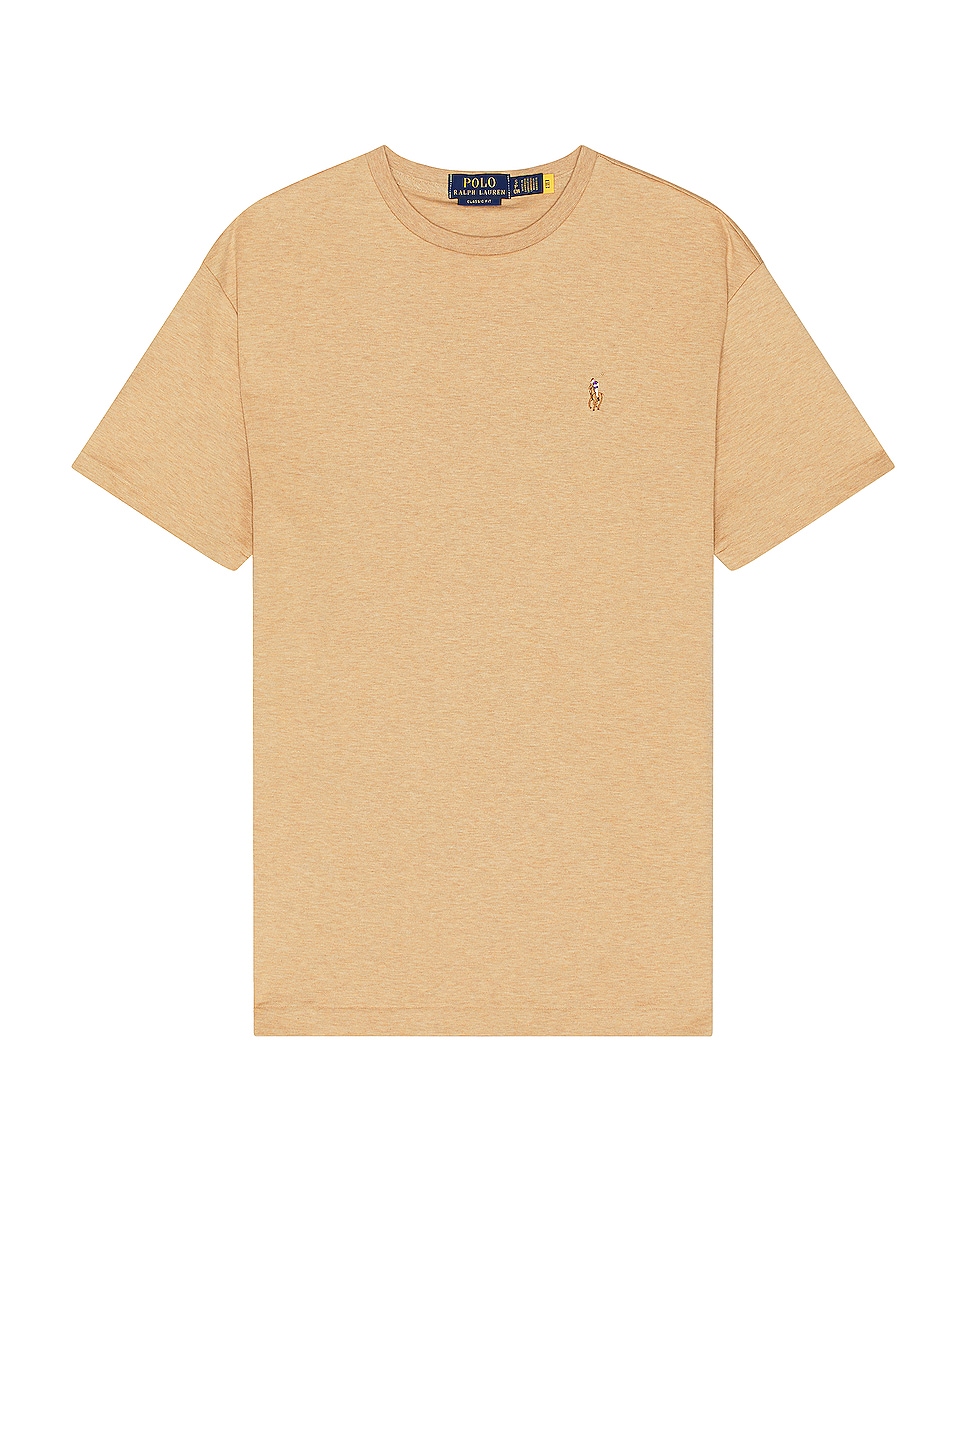 Image 1 of Polo Ralph Lauren Pima Polo Tee in Classic Camel Heather